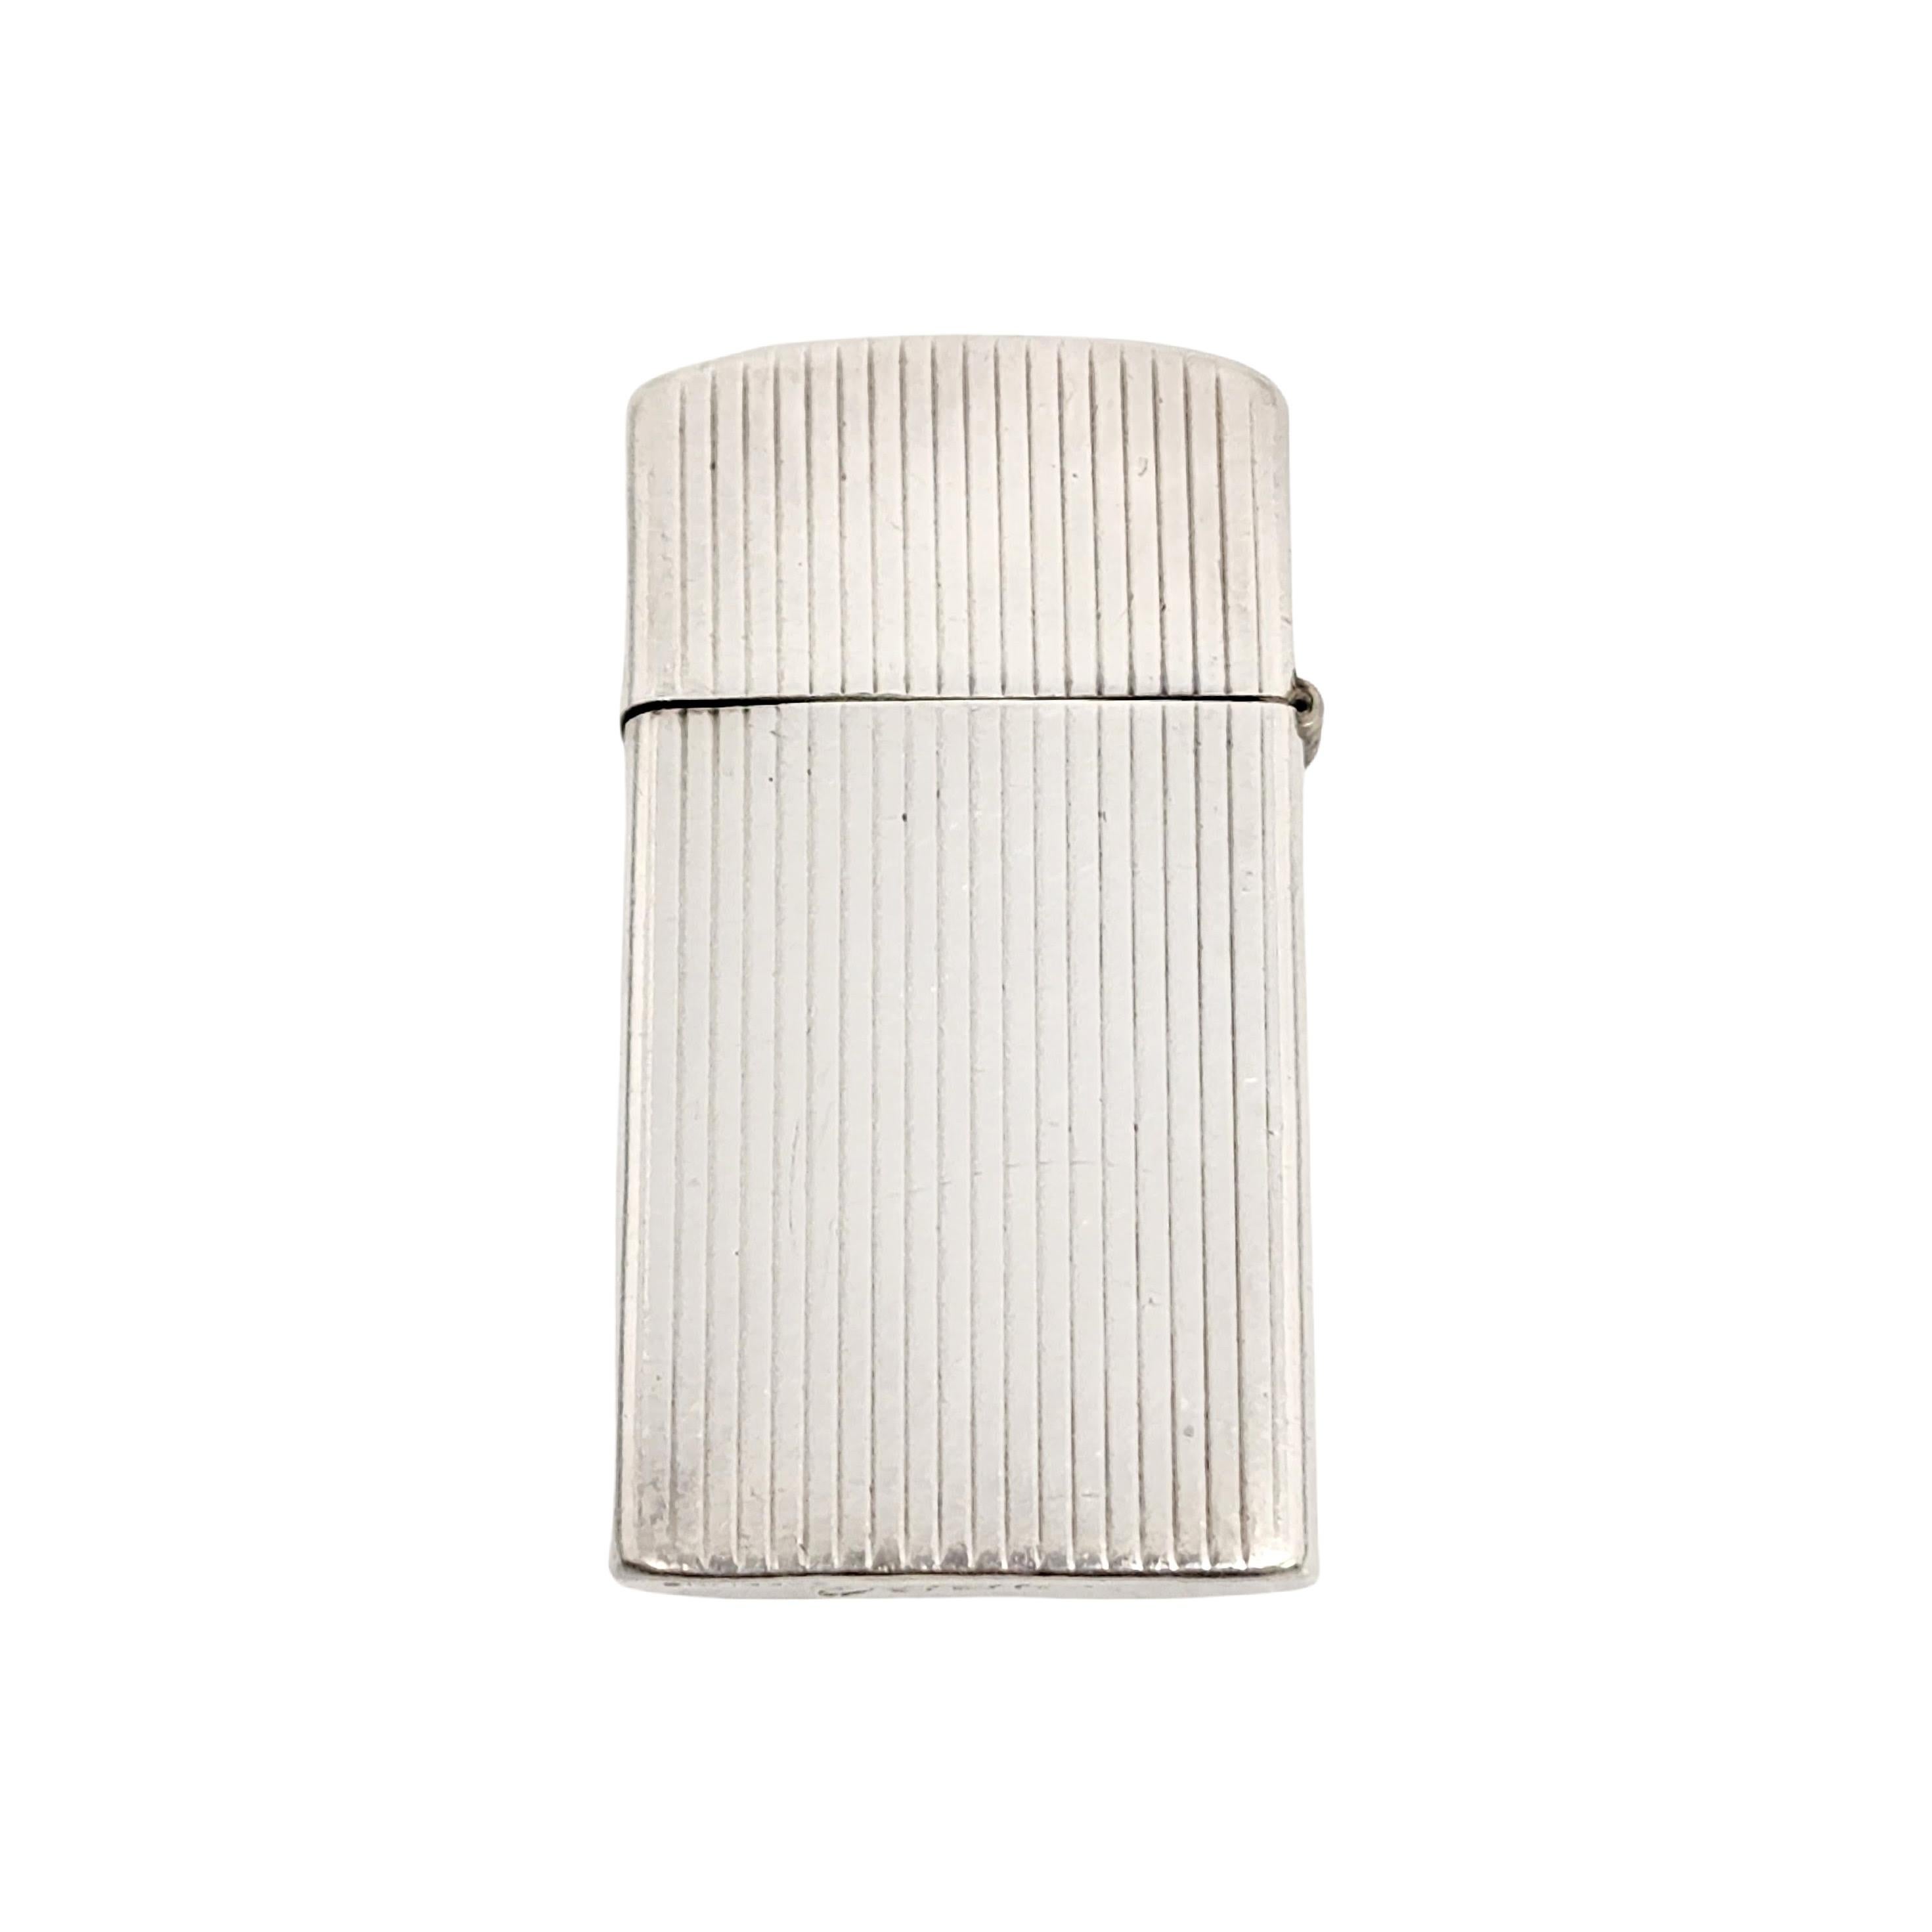 Zippo sterling silver slim lighter case with monogram, circa 1960.

Monogram appears to be MBK

A case for a Zippo Slim lighter of engine turned design featuring vertical lines. Monogram in a rectangular smooth polished cartouche. The slim date code